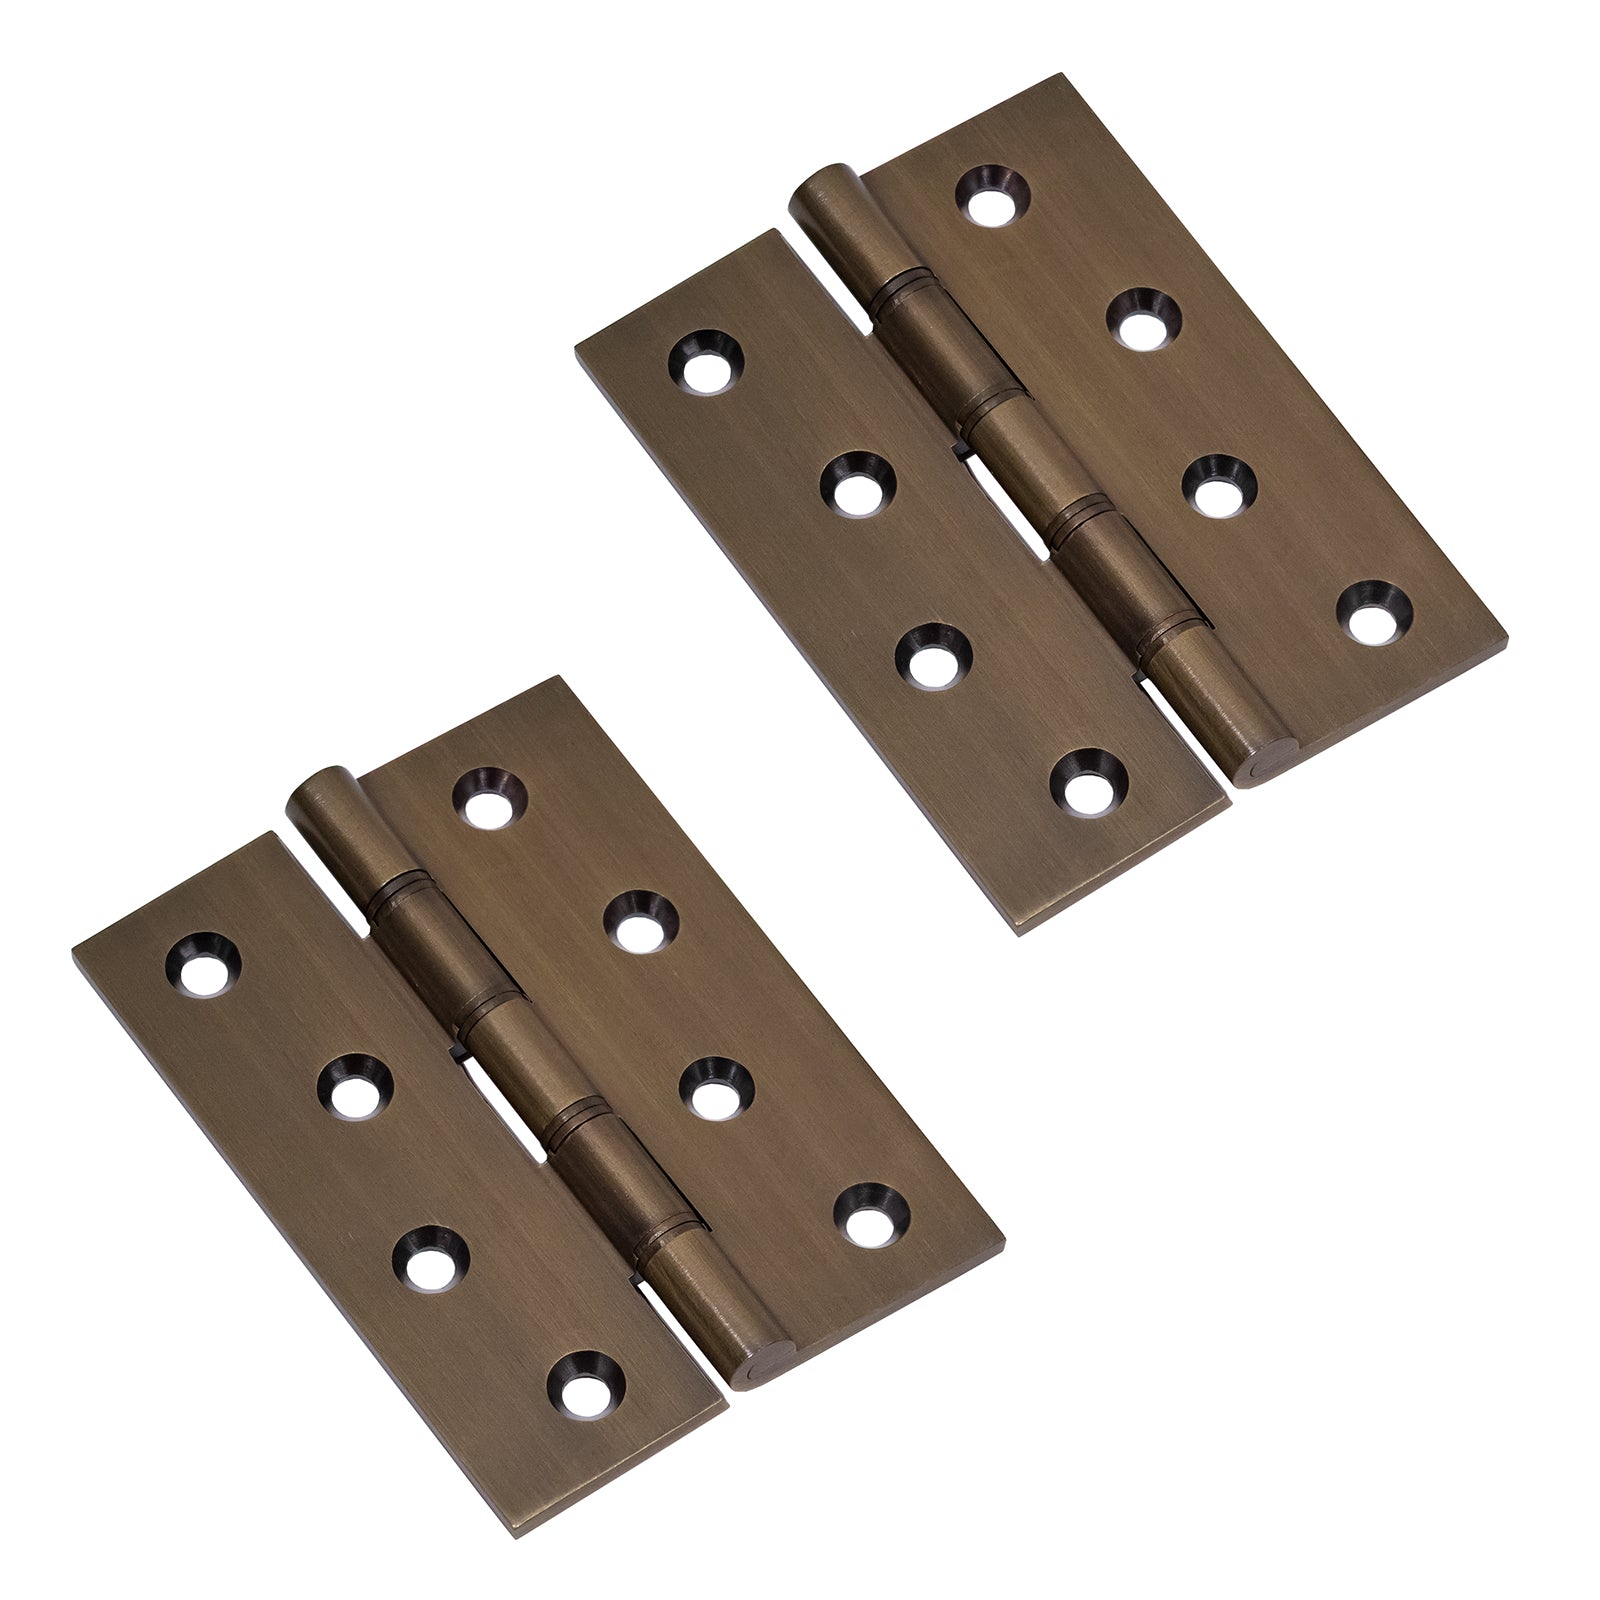 Solid Brass 4 Inch Butt Hinge in Aged Brass Finish